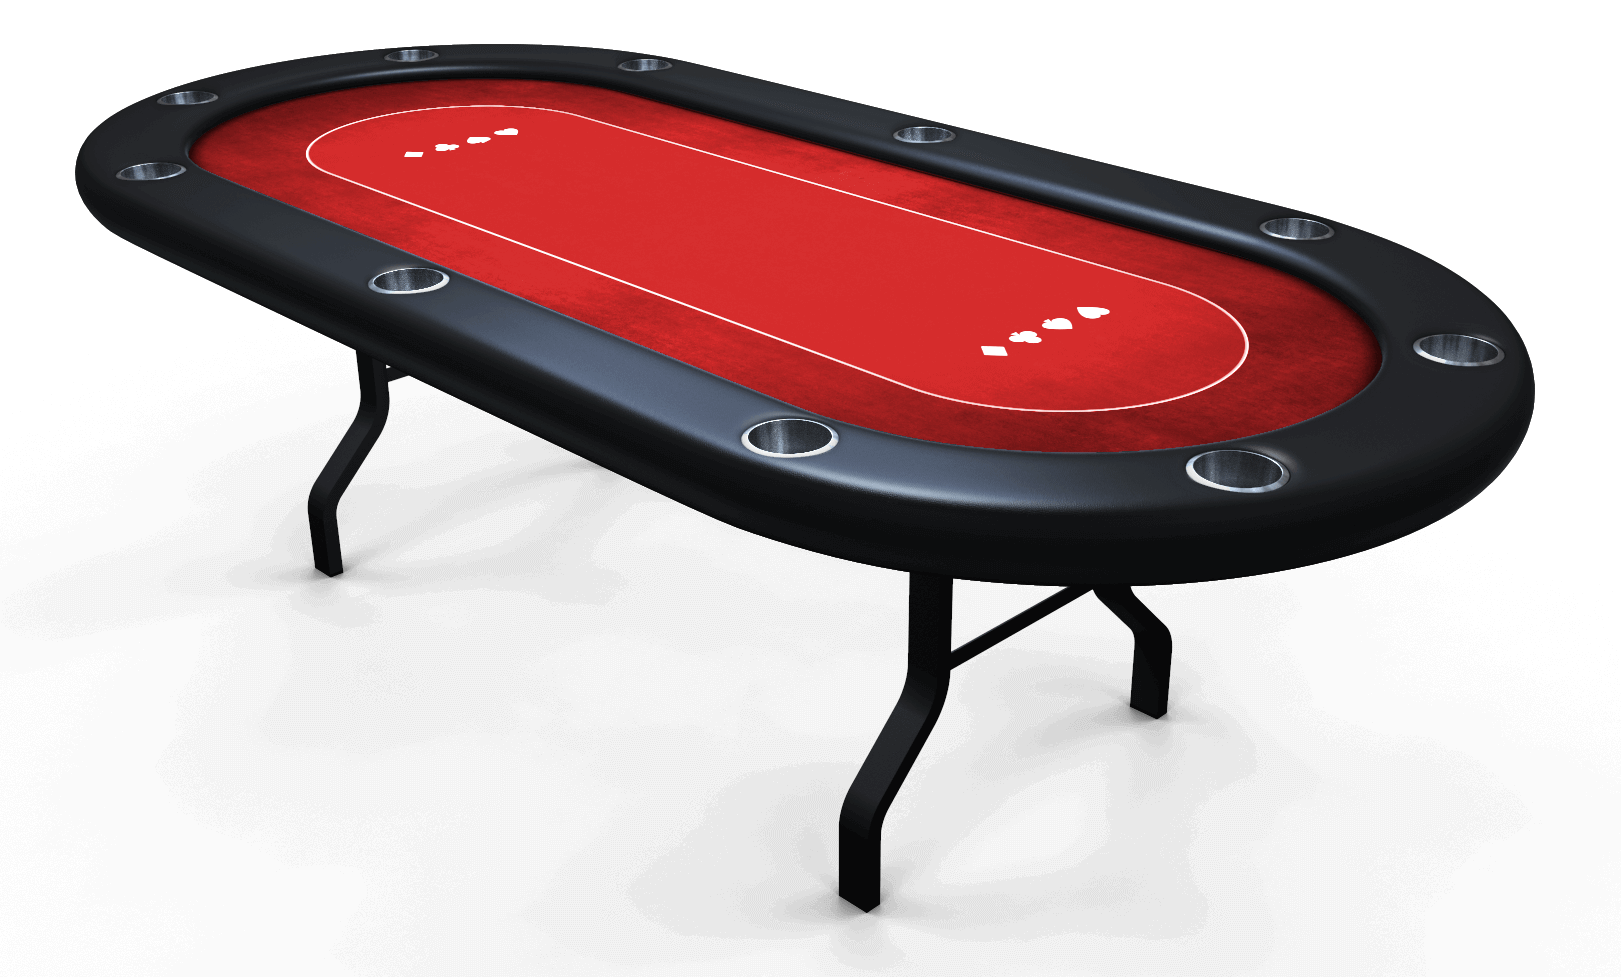 Oval-shaped poker table with ten cupholders in the black vinyl foam rail, red felt with a white pattern, and metal table legs.